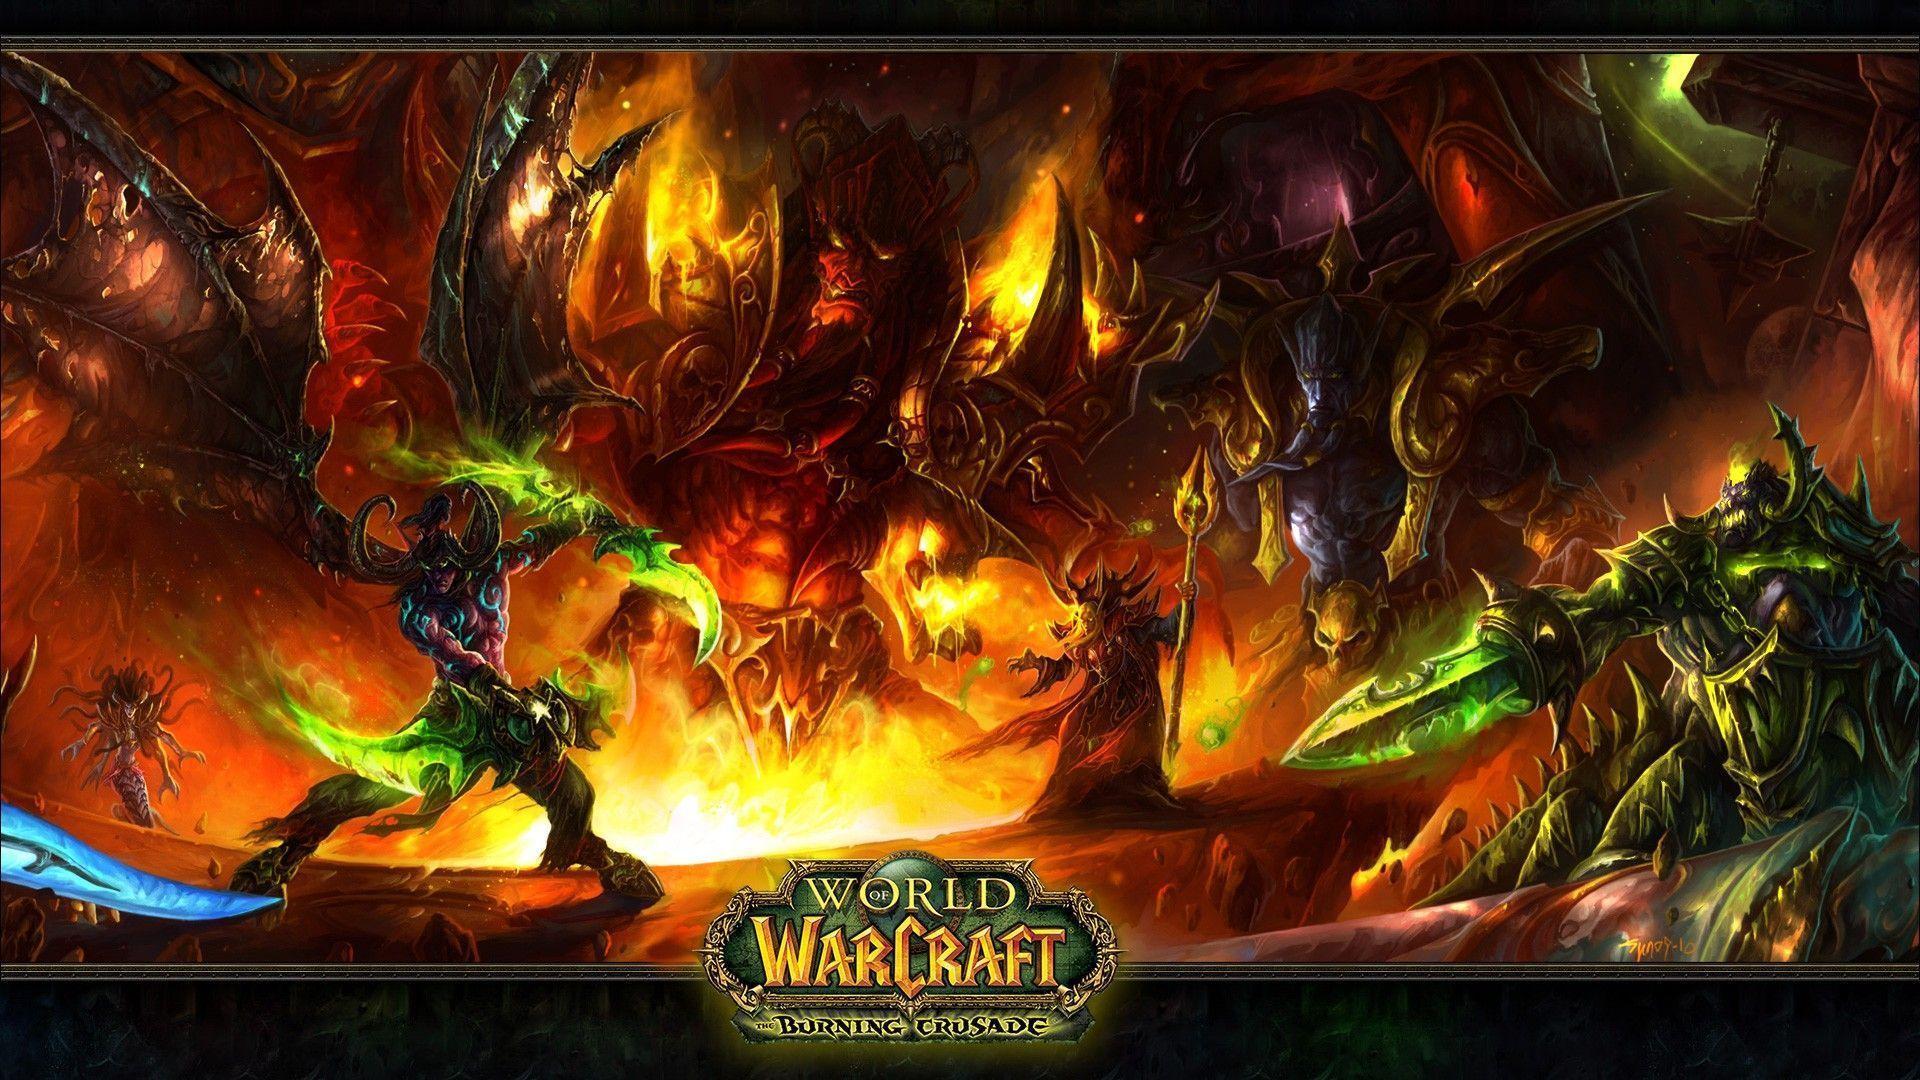 https://wikiwow.ir/dl/2021/04/AOTcaf9-world-of-warcraft-backgrounds.jpg